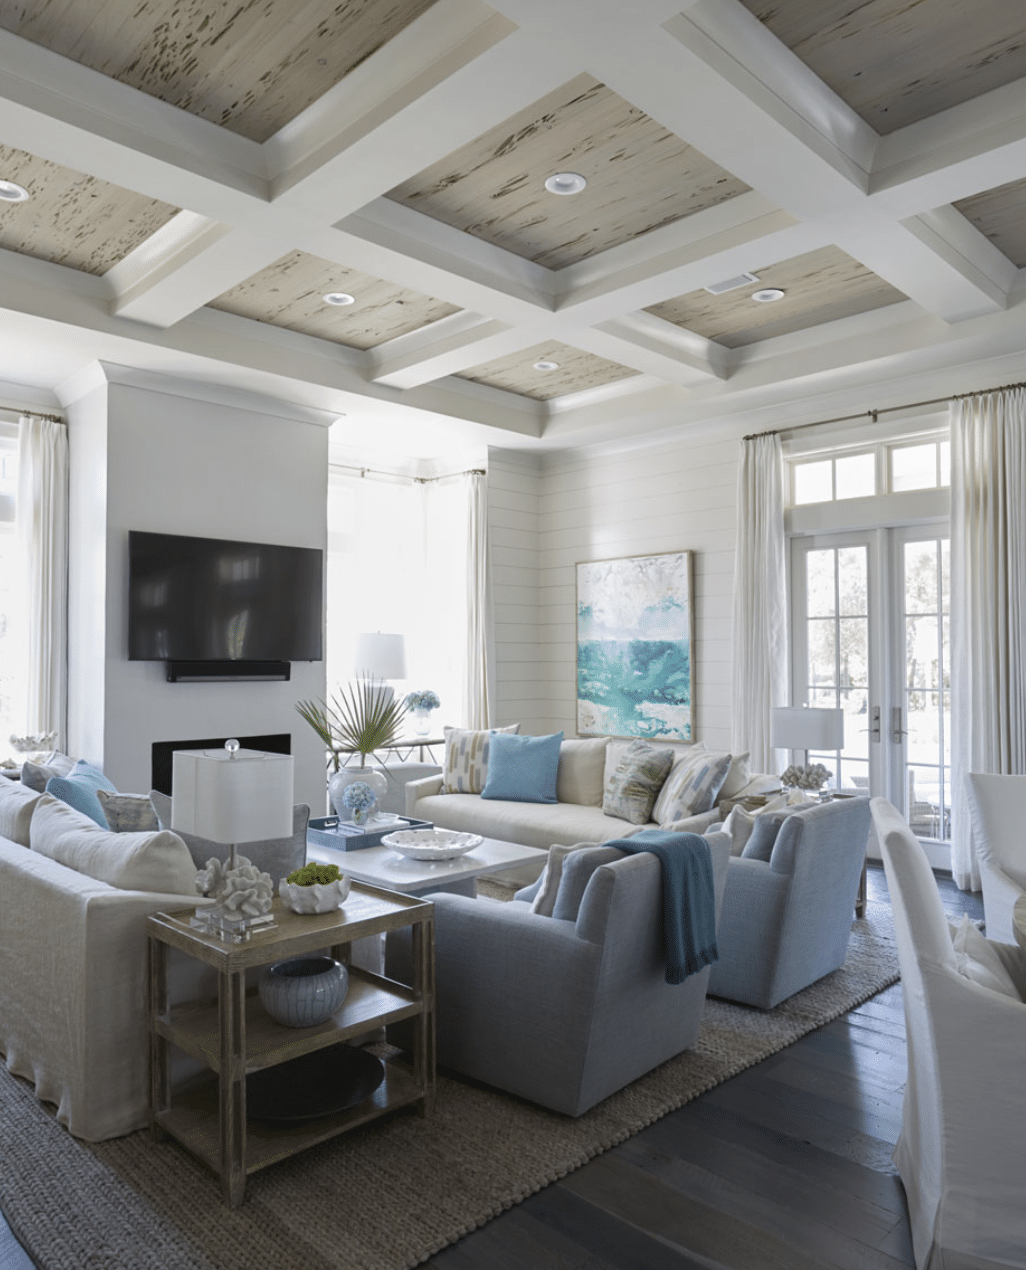 Nestled in the serene beauty of Santa Rosa Beach, this dreamy beach house designed by Geoff Chick Architects captivates the heart with its elegant and calming design, showcasing a harmonious blend of blue and white tones that mirror the nearby ocean waves and sandy shores. - Colleen Duffley Productions